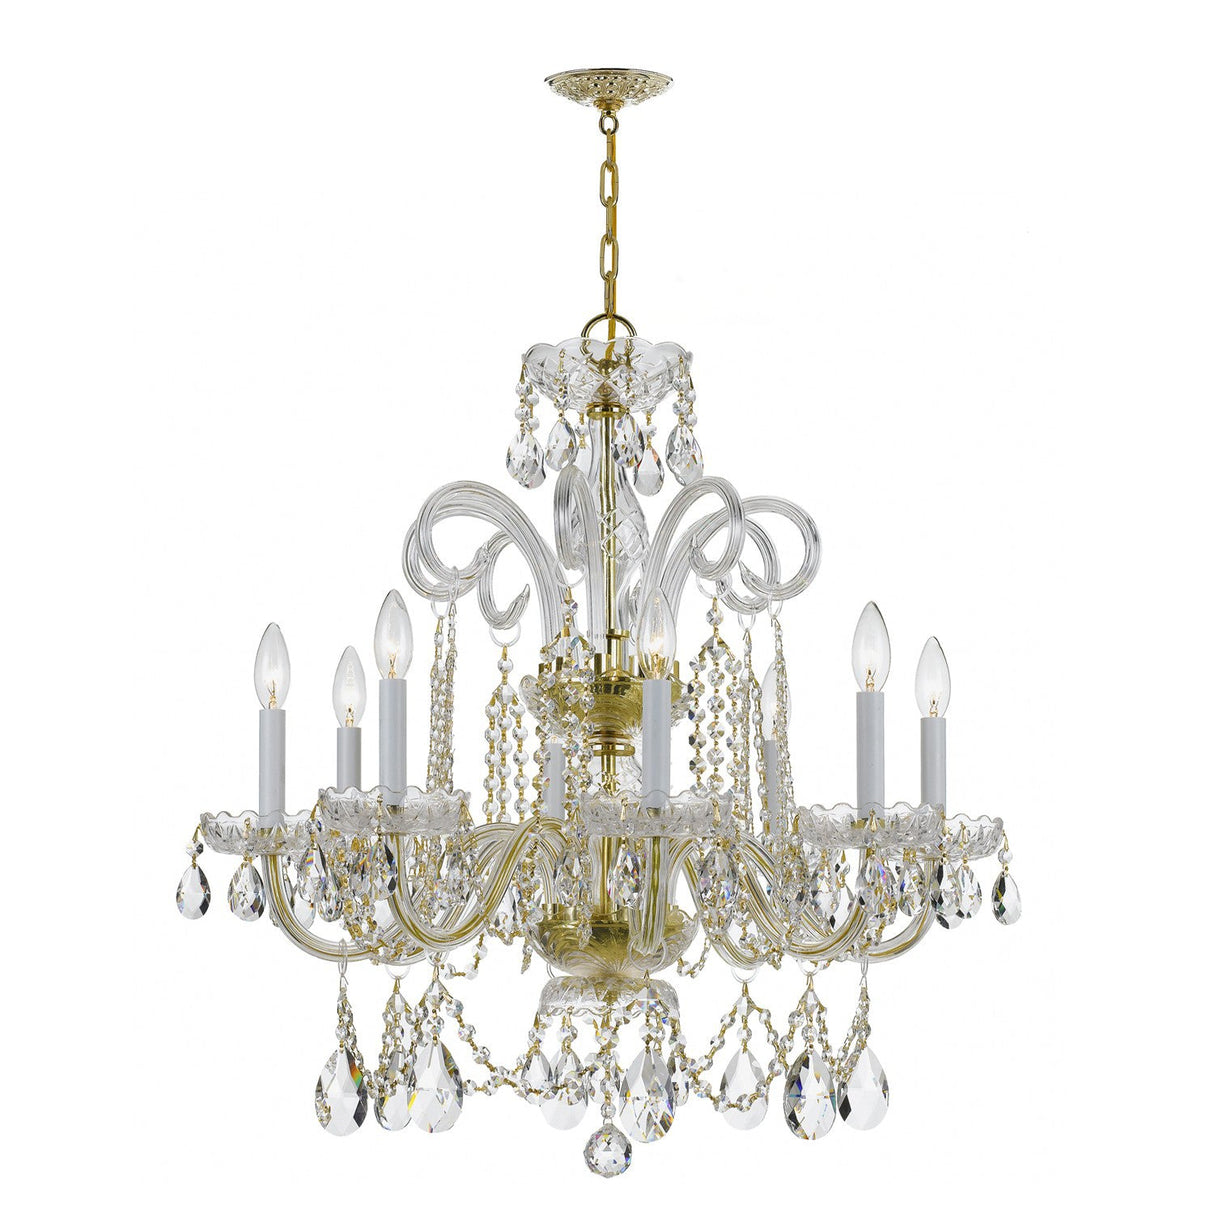 Traditional Crystal 8 Light Spectra Crystal Polished Brass Chandelier 5008-PB-CL-SAQ